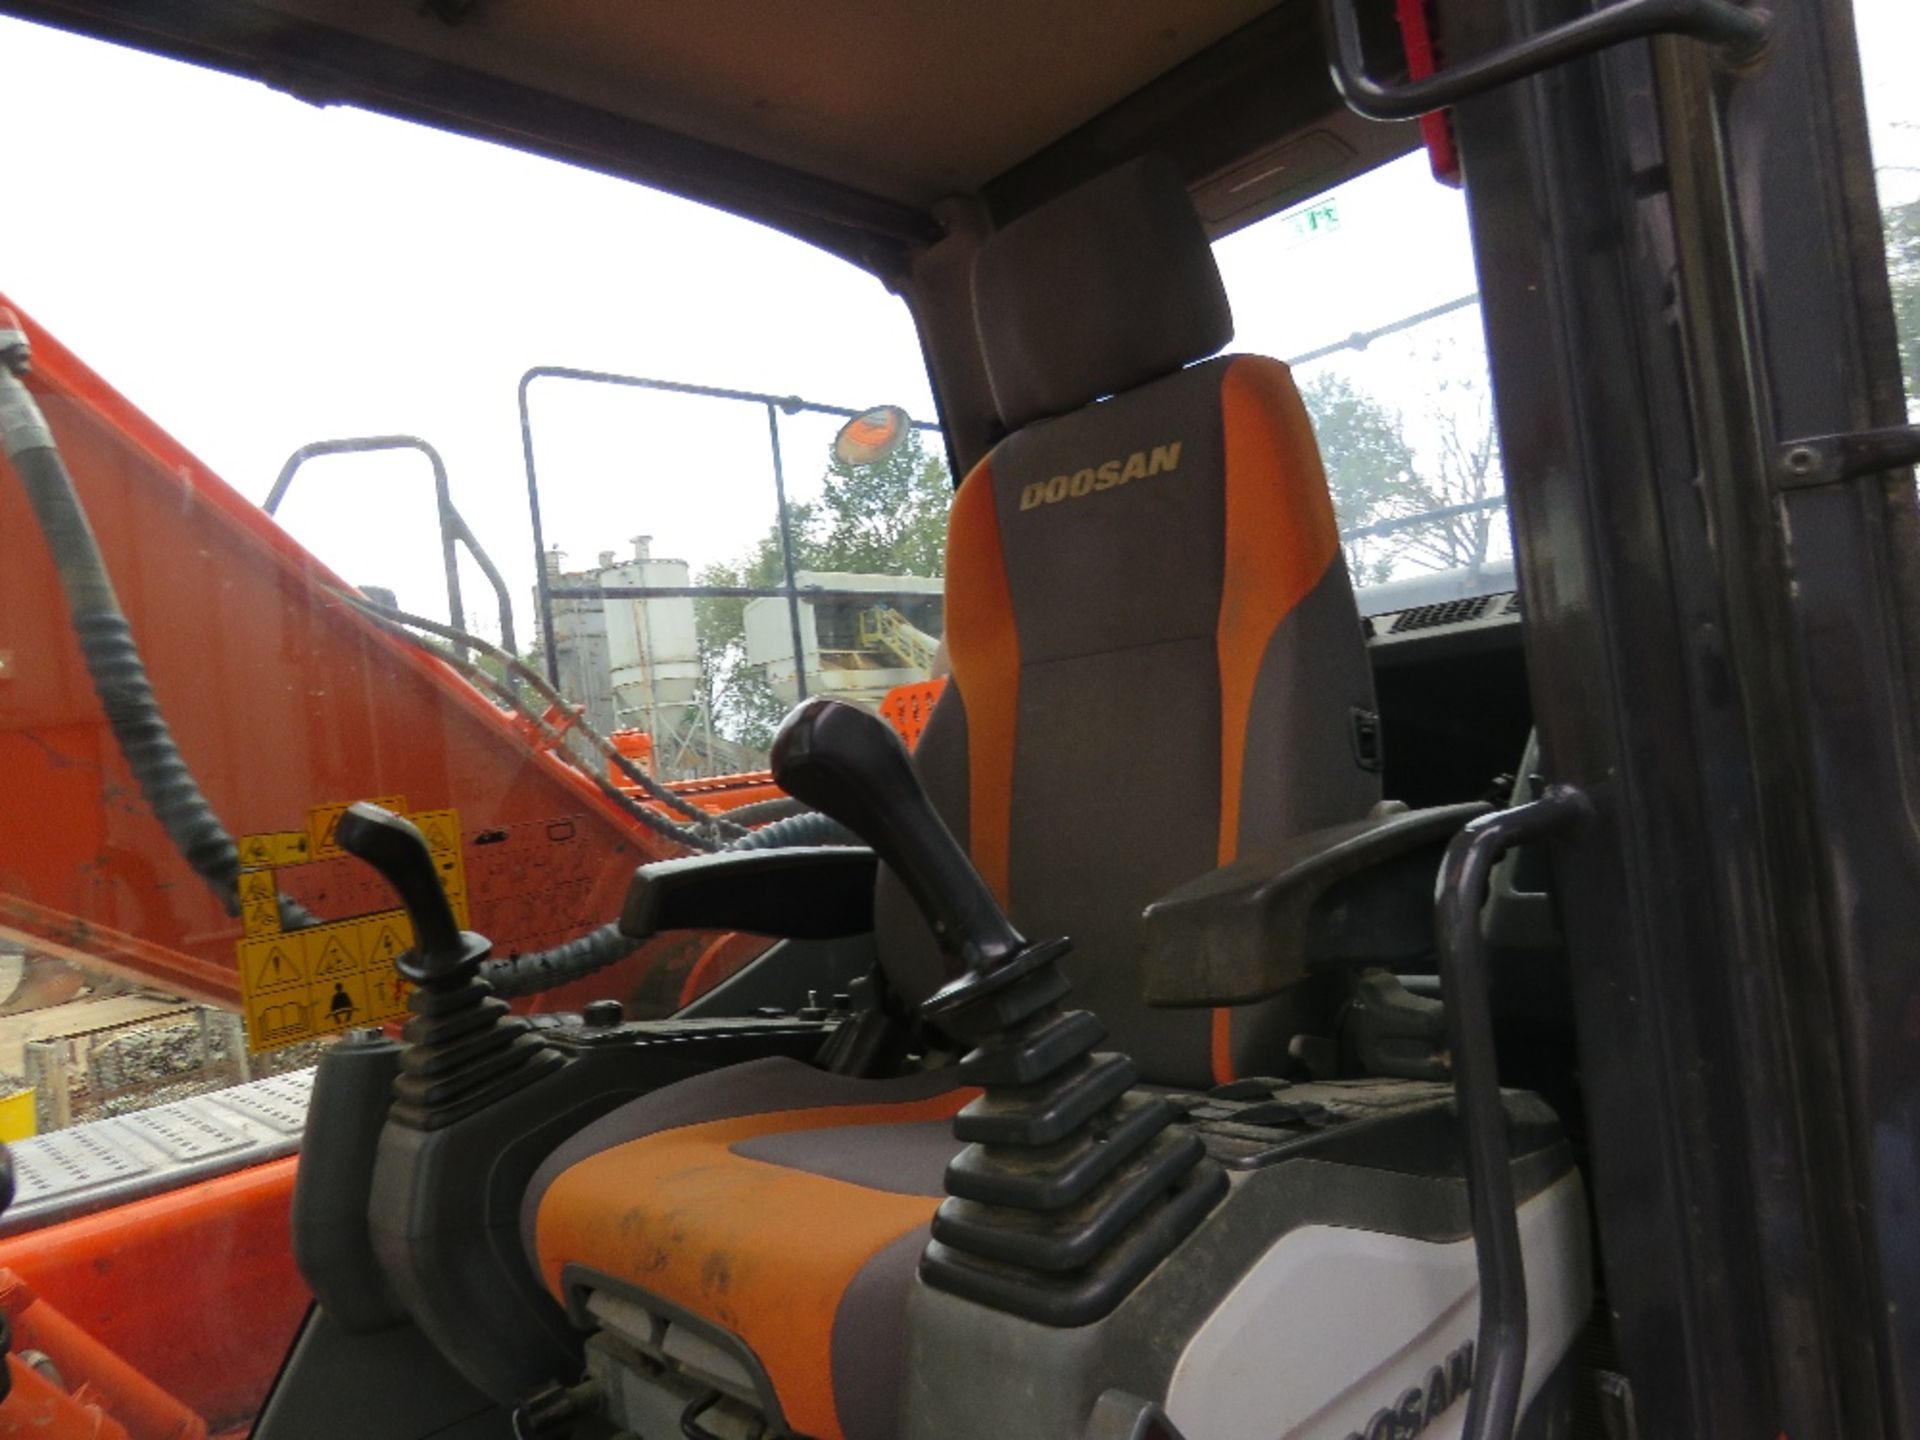 DOOSAN DX225LC-3 STEEL TRACKED EXCAVATOR 2016 BUILD. Non adblue!! only 10% plus vat BP on this lot - Image 11 of 16